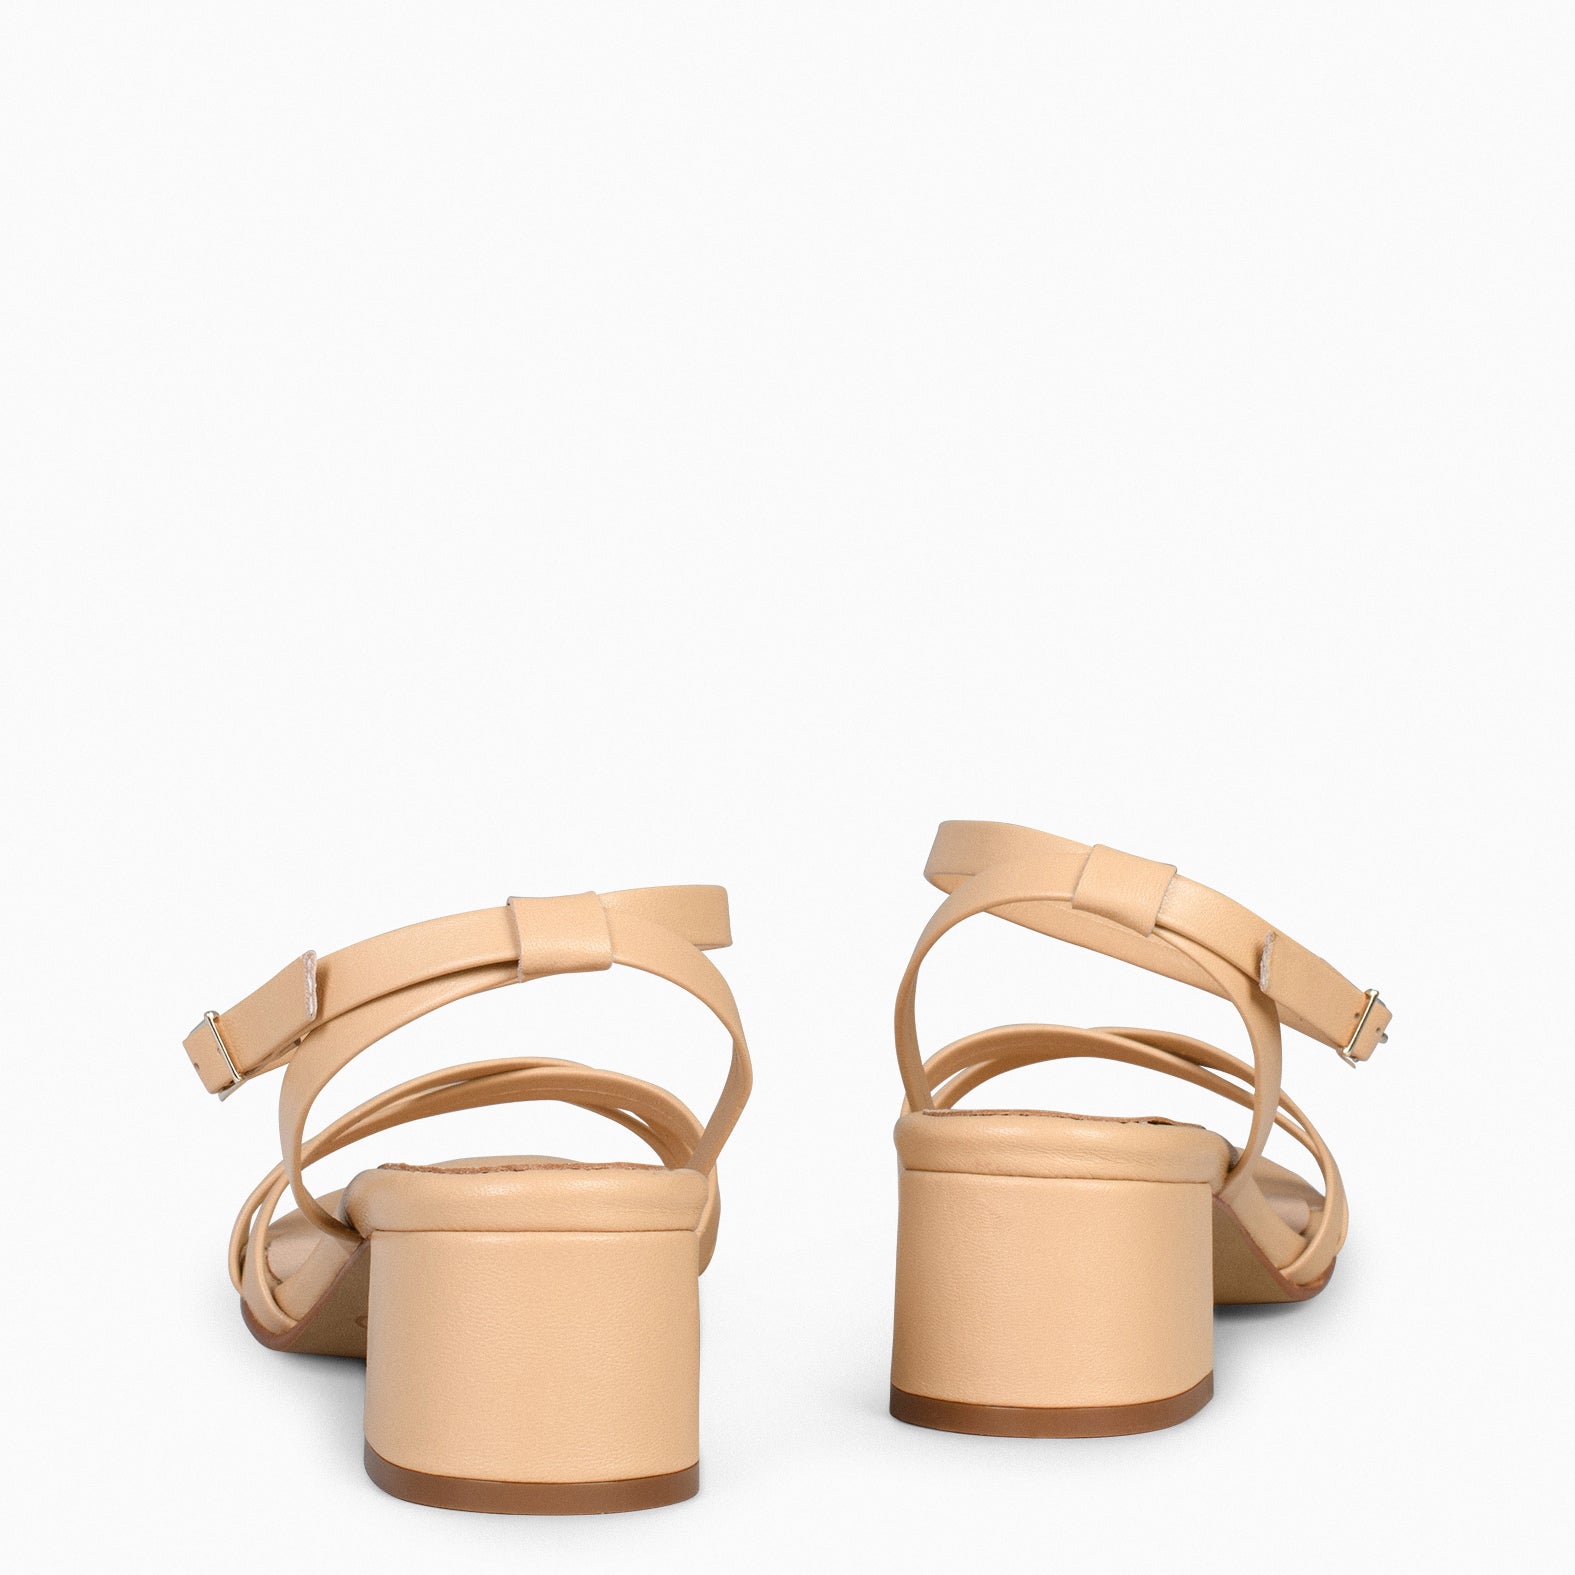 VIENA – BEIGE SANDAL WITH THIN STRAPS AND LOW HEEL